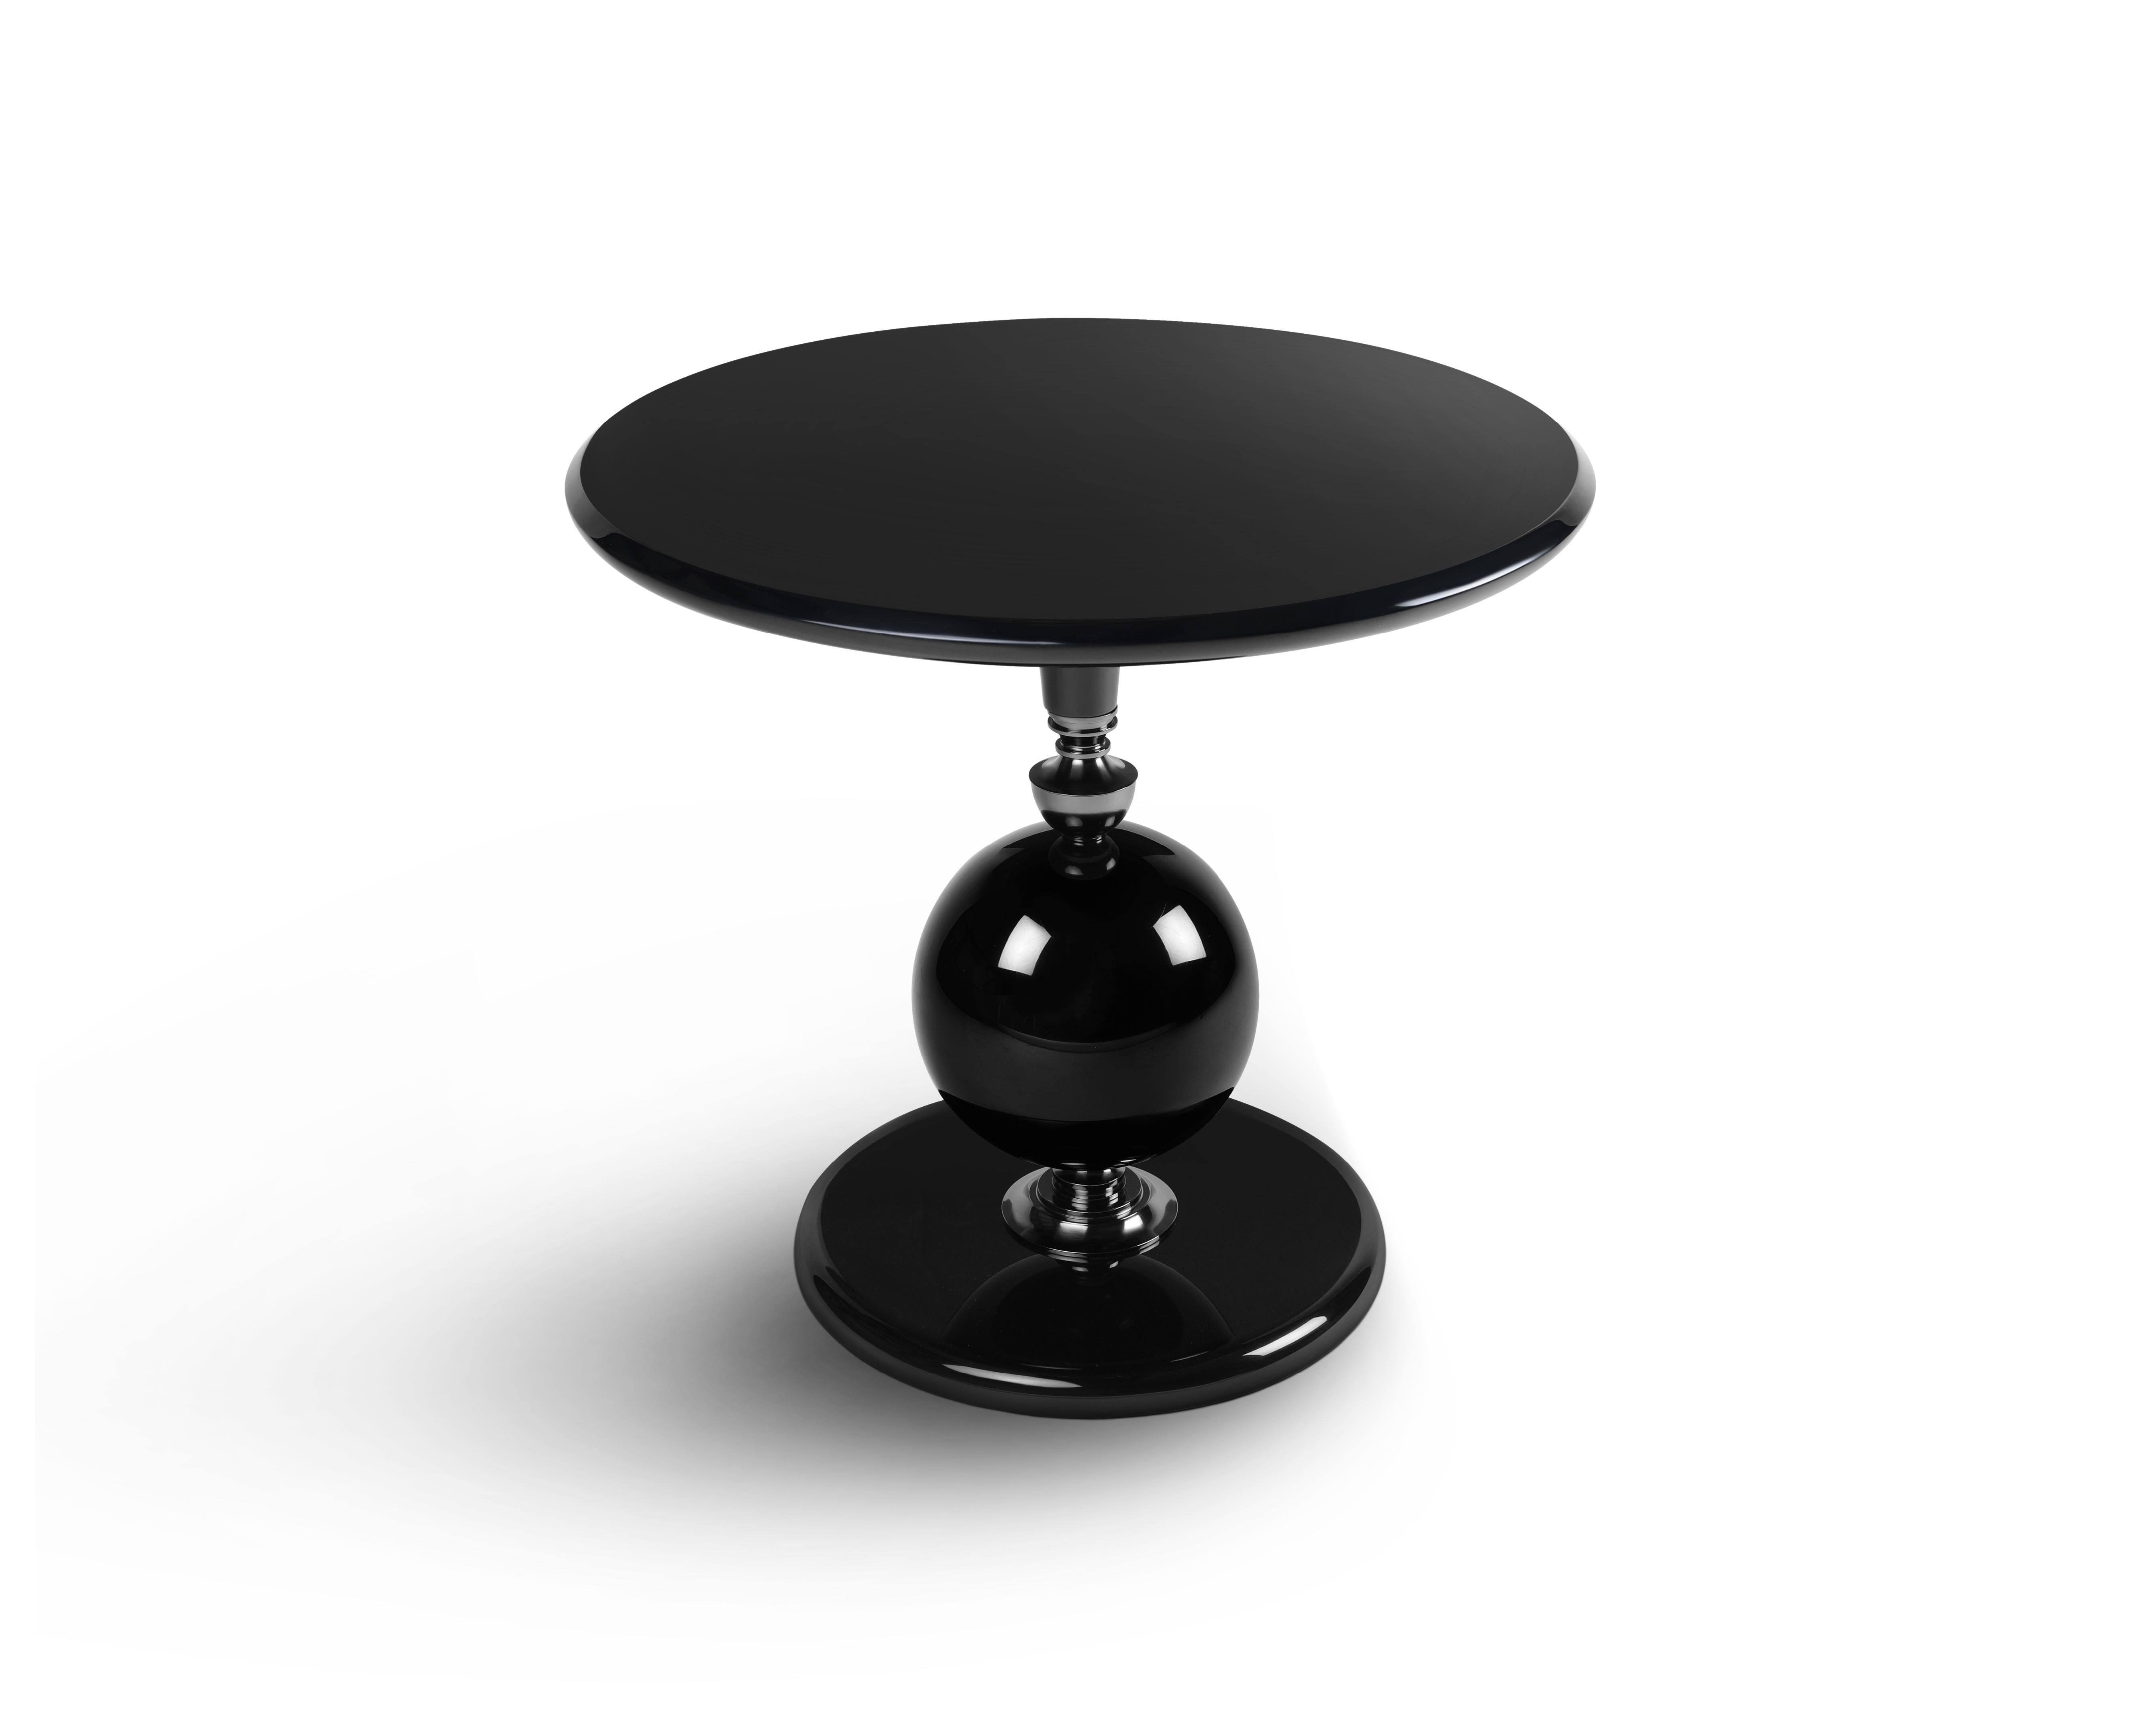 Moro side table by Madheke
Dimensions: D 55 x W 55 x H 50 cm.
Materials: Lacquer, metal, glass.
Classic silhouette, lacquered body with black nickel detailing.

Reflecting the finest in craftsmanship, innovation and heritage, Madheke creates